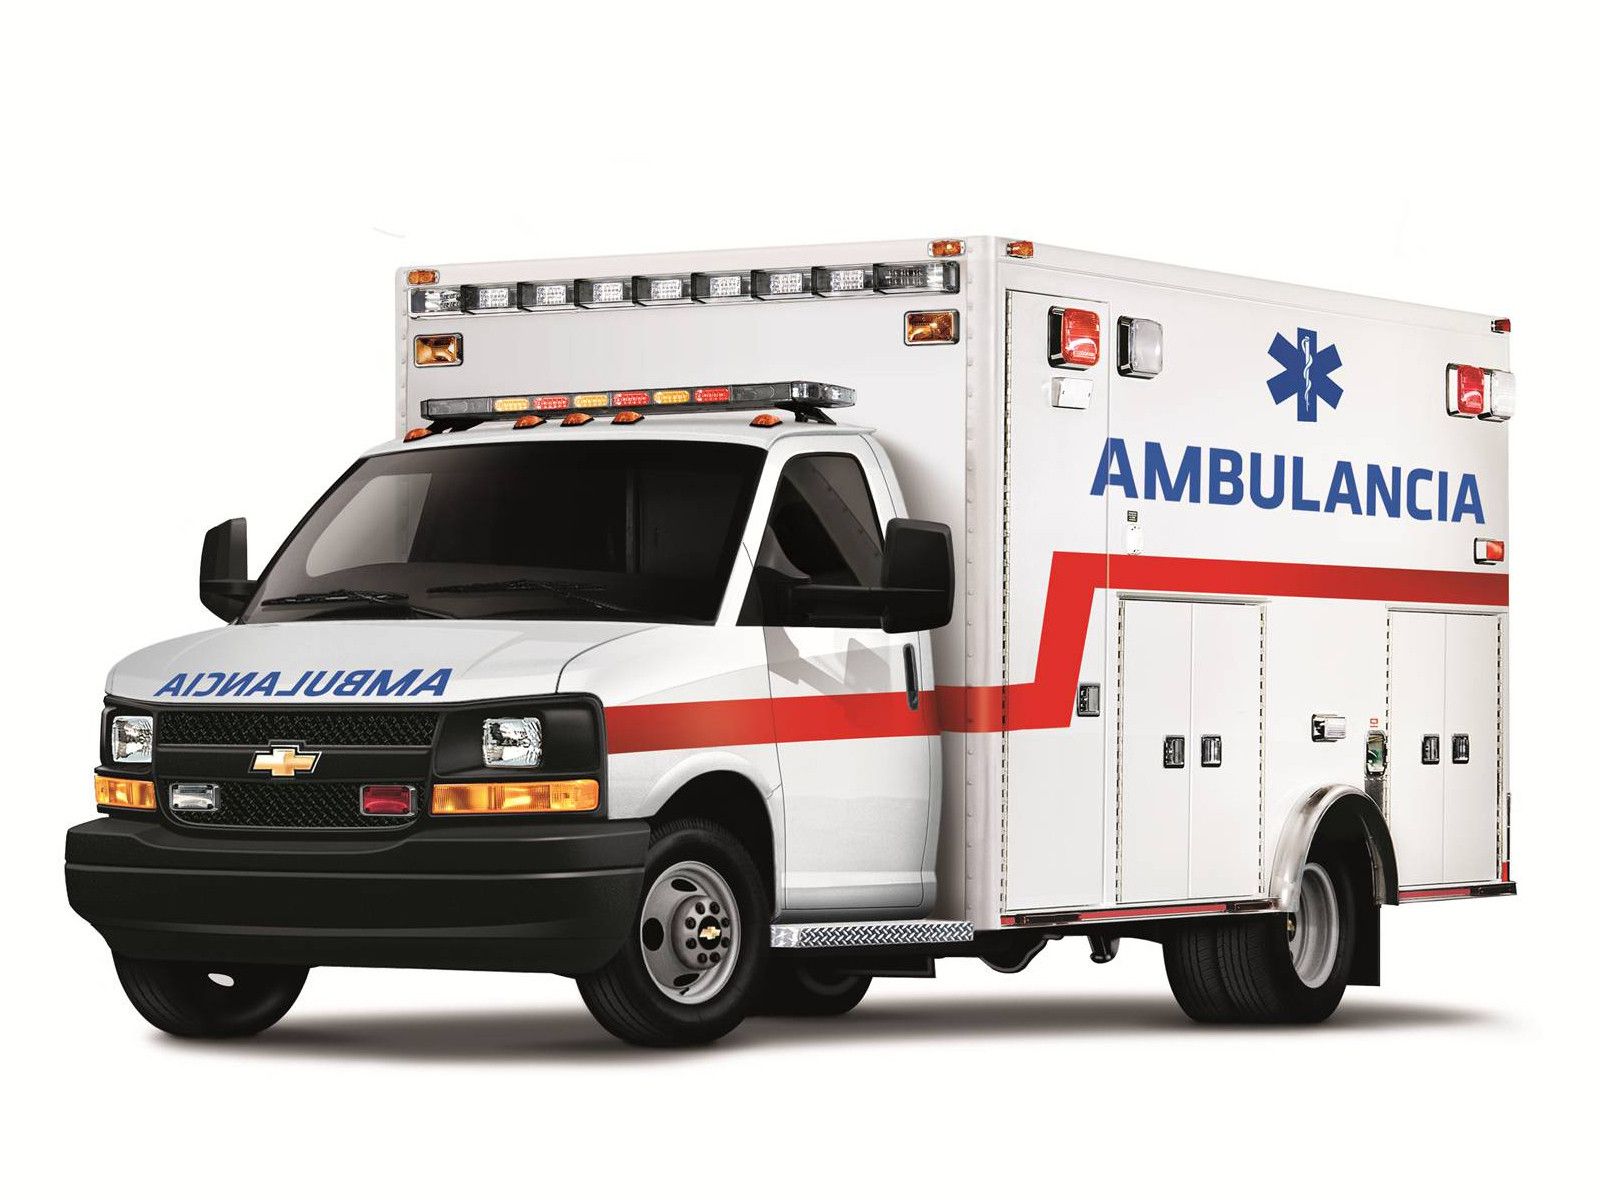 Ambulance Wallpaper High Quality HDq Cover Background